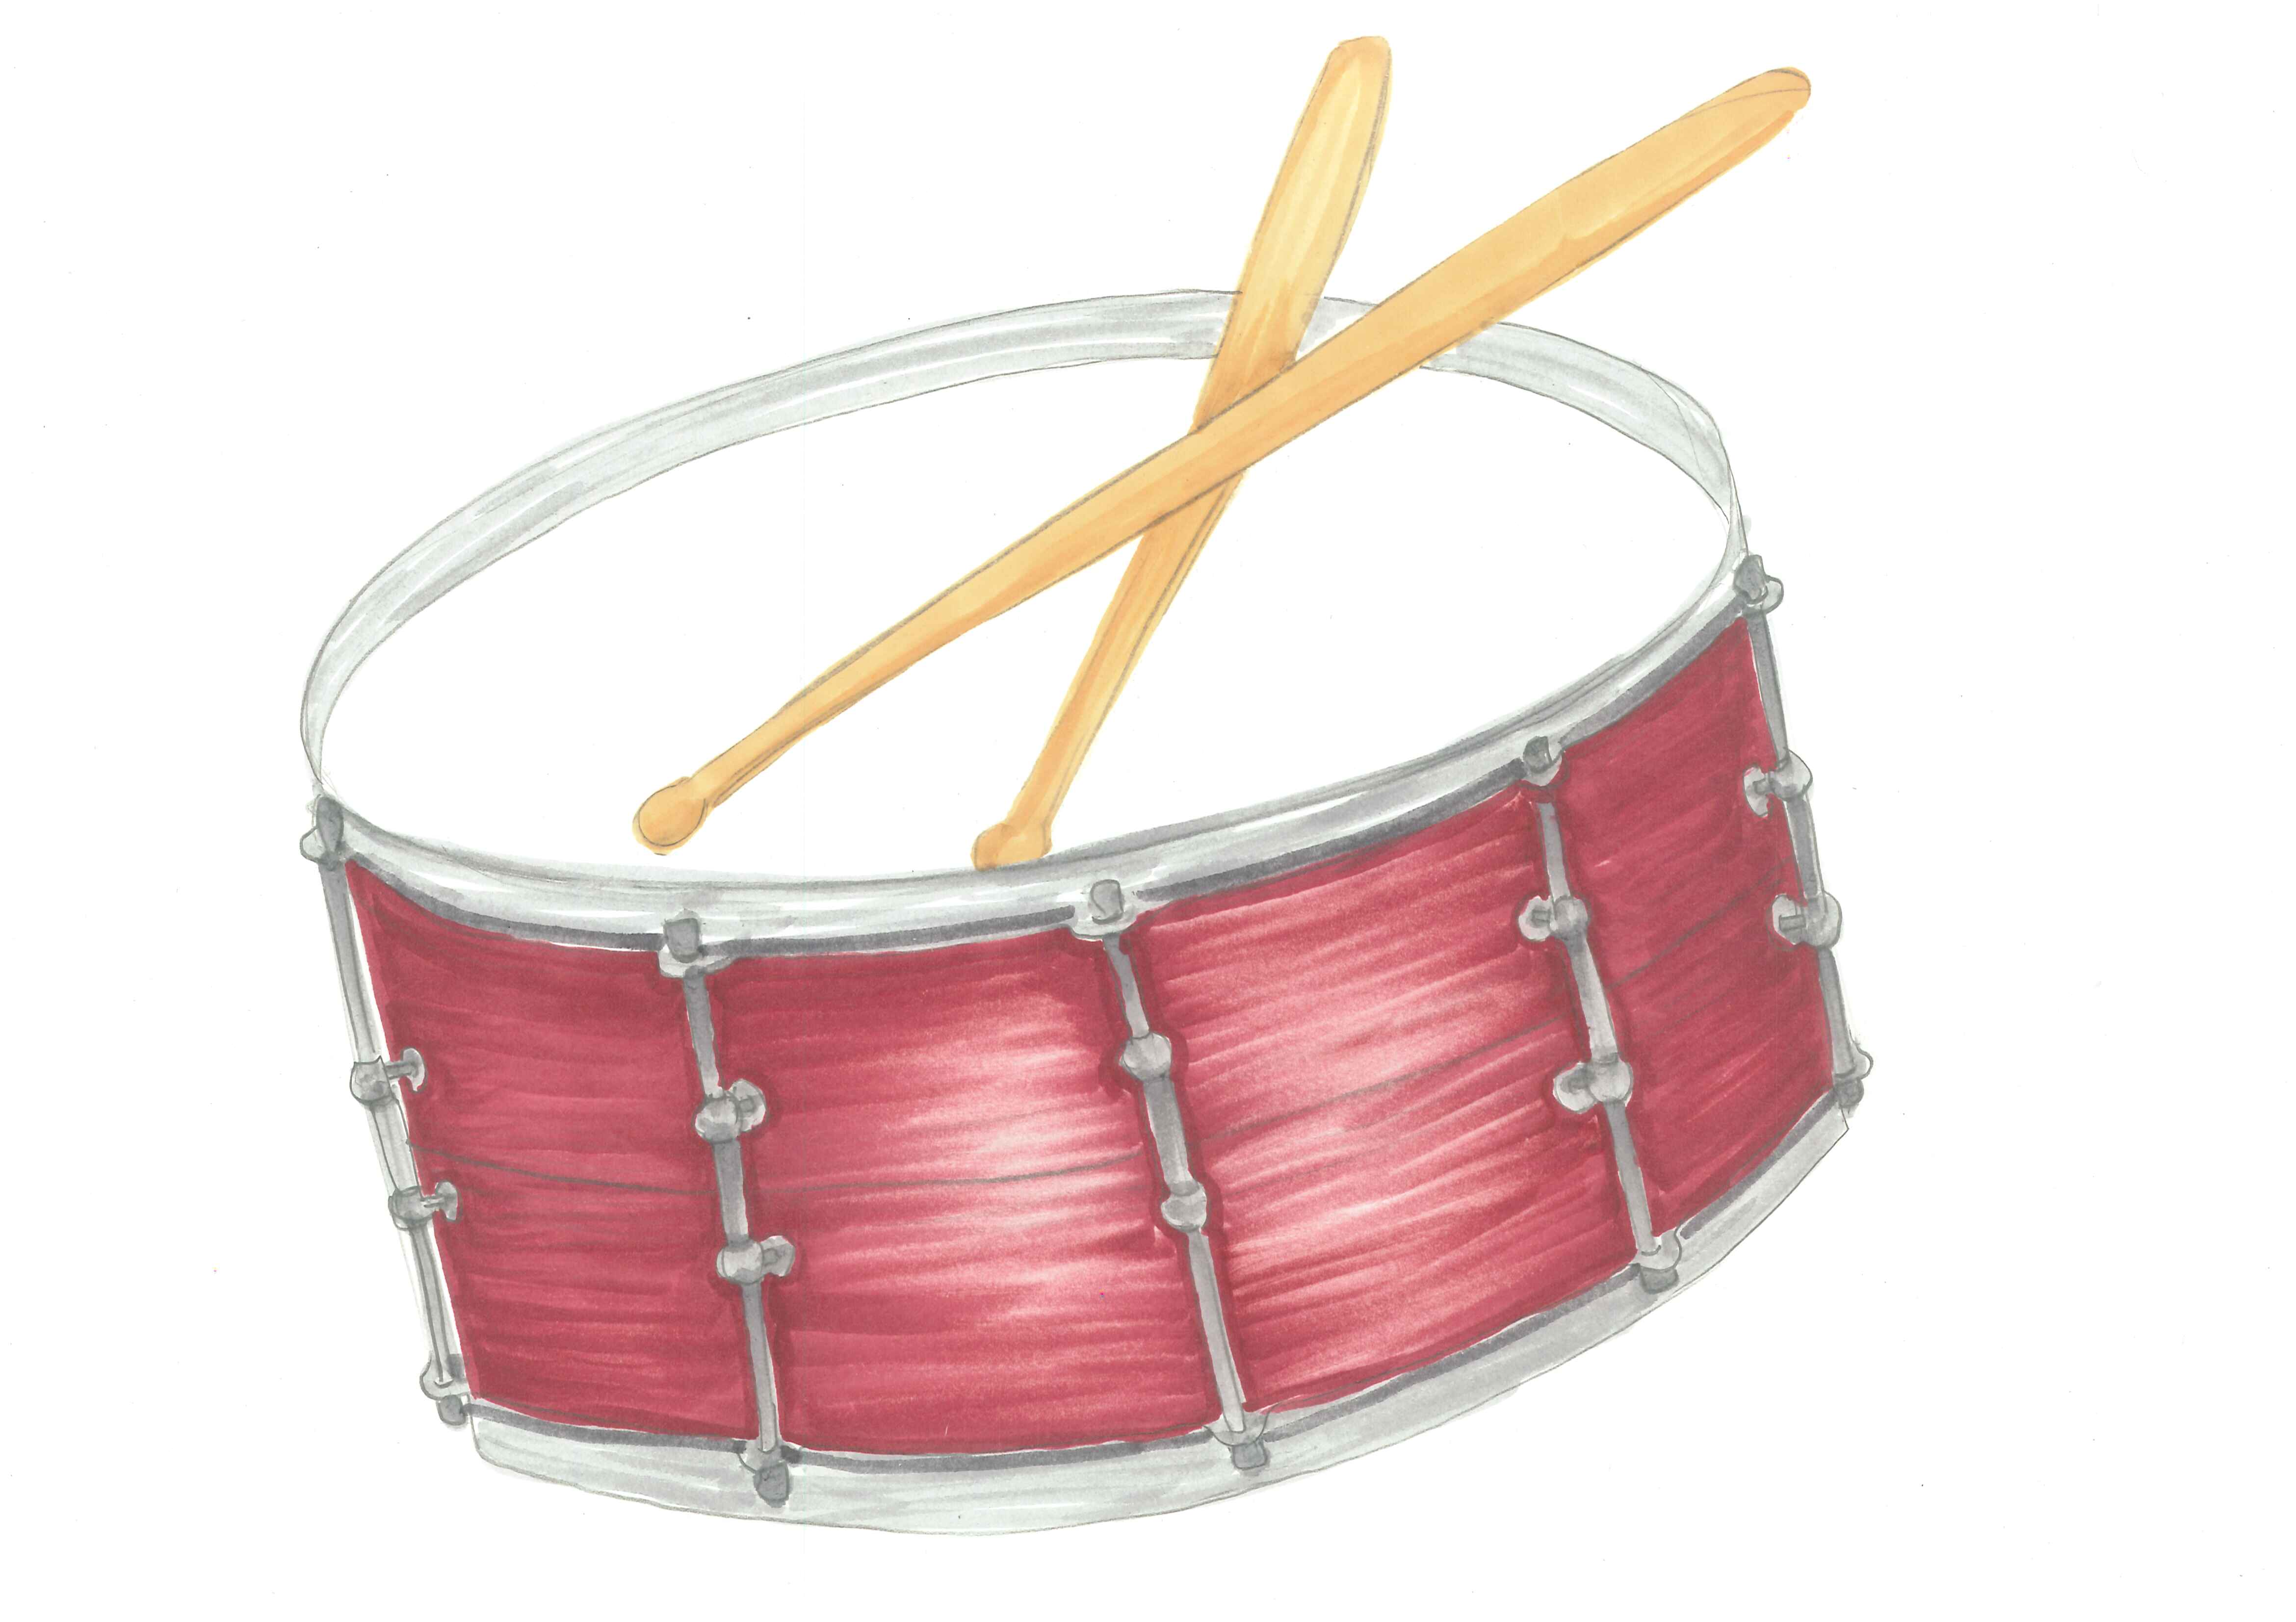 Snare Drum Clipart Clip Art Musical Instruments